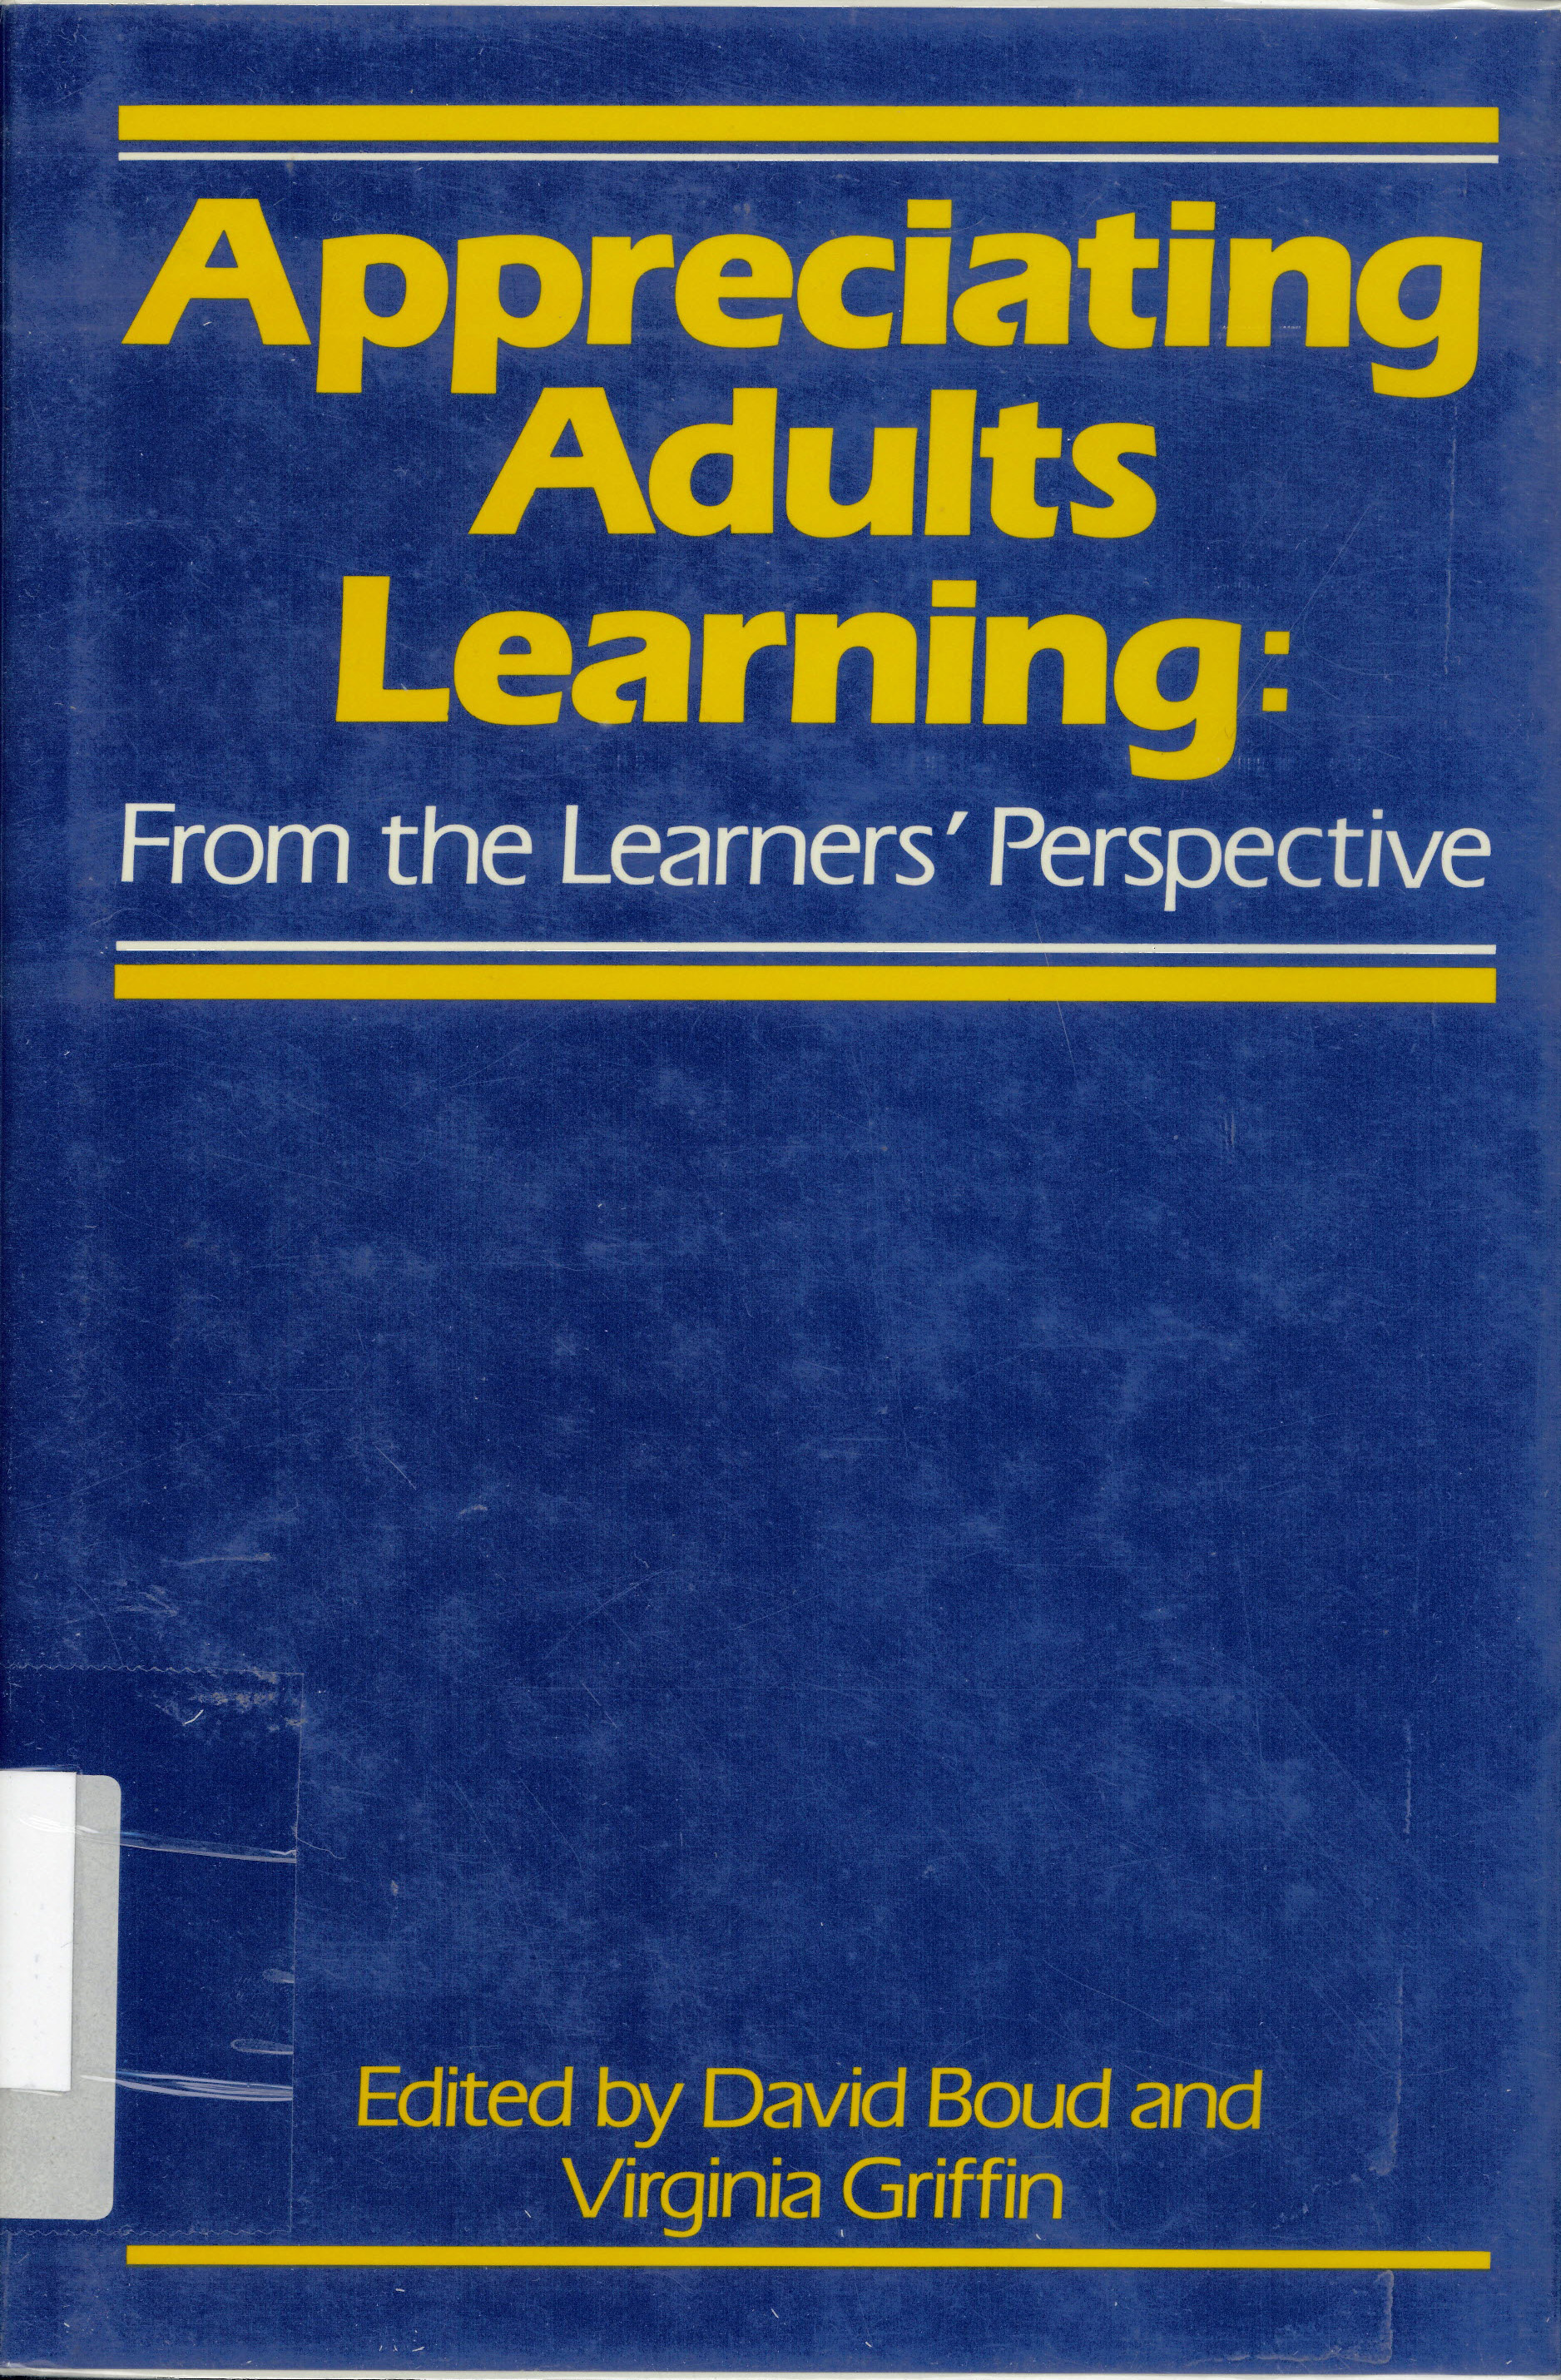 Appreciating adults learning : from the learners' perspective